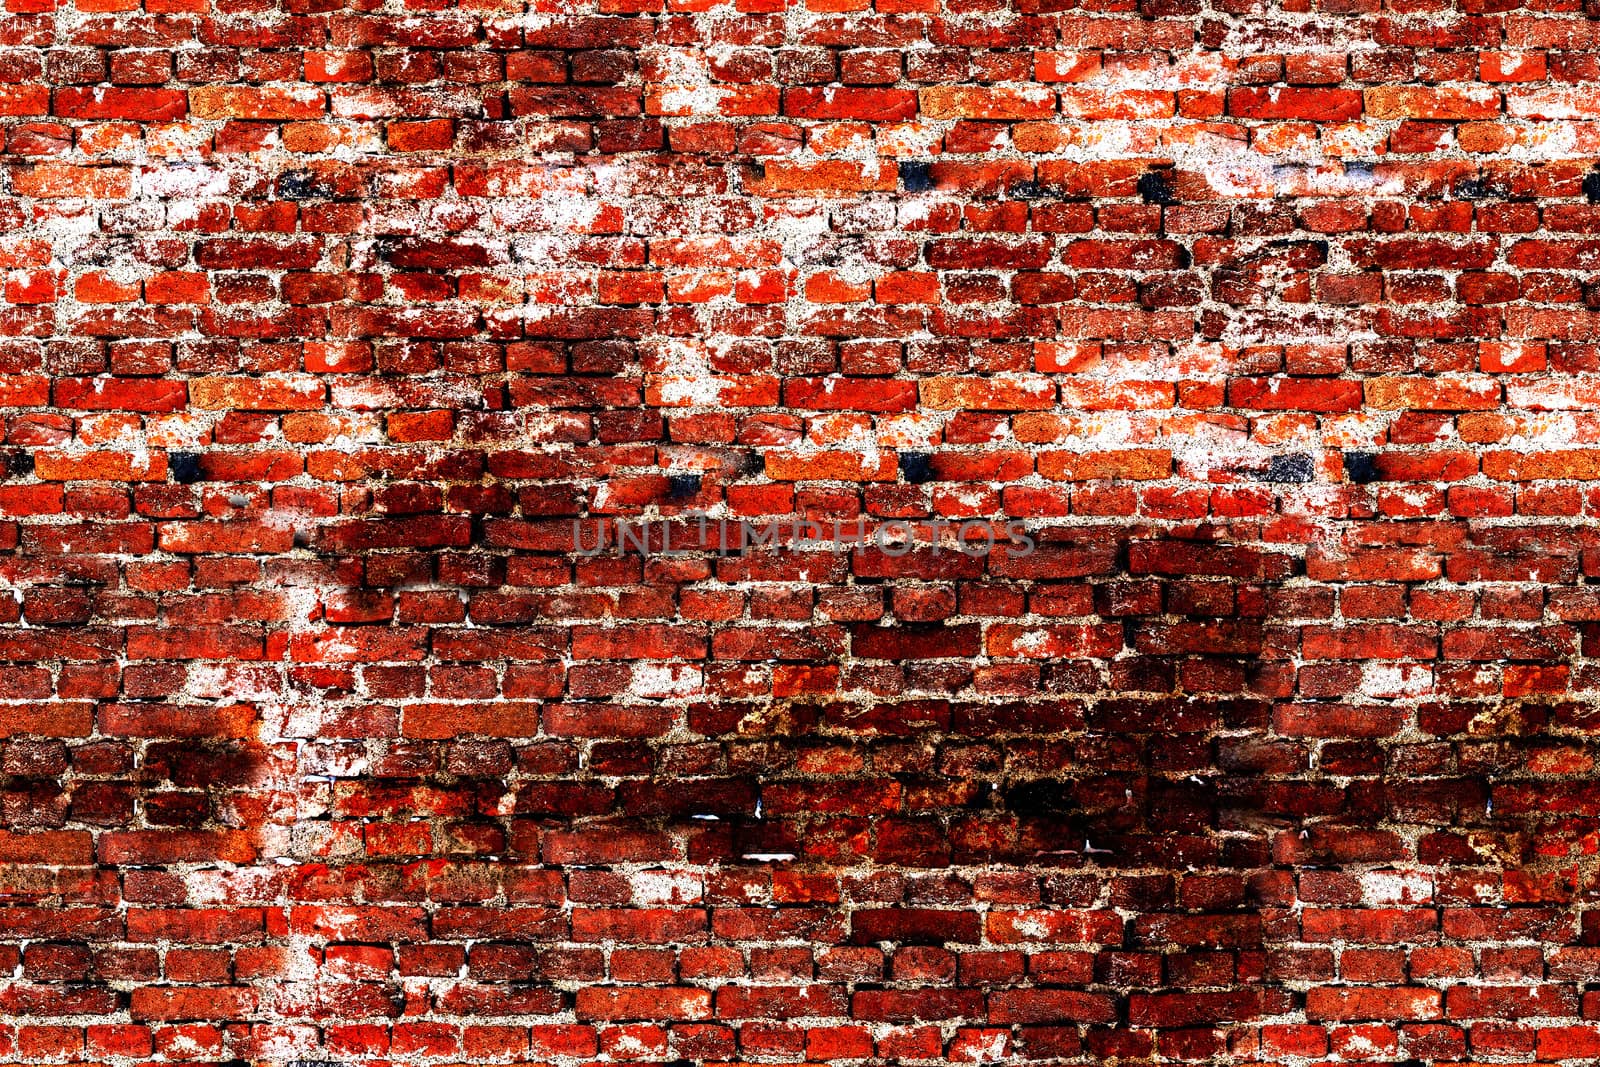 The surface of the brick from the background wall.